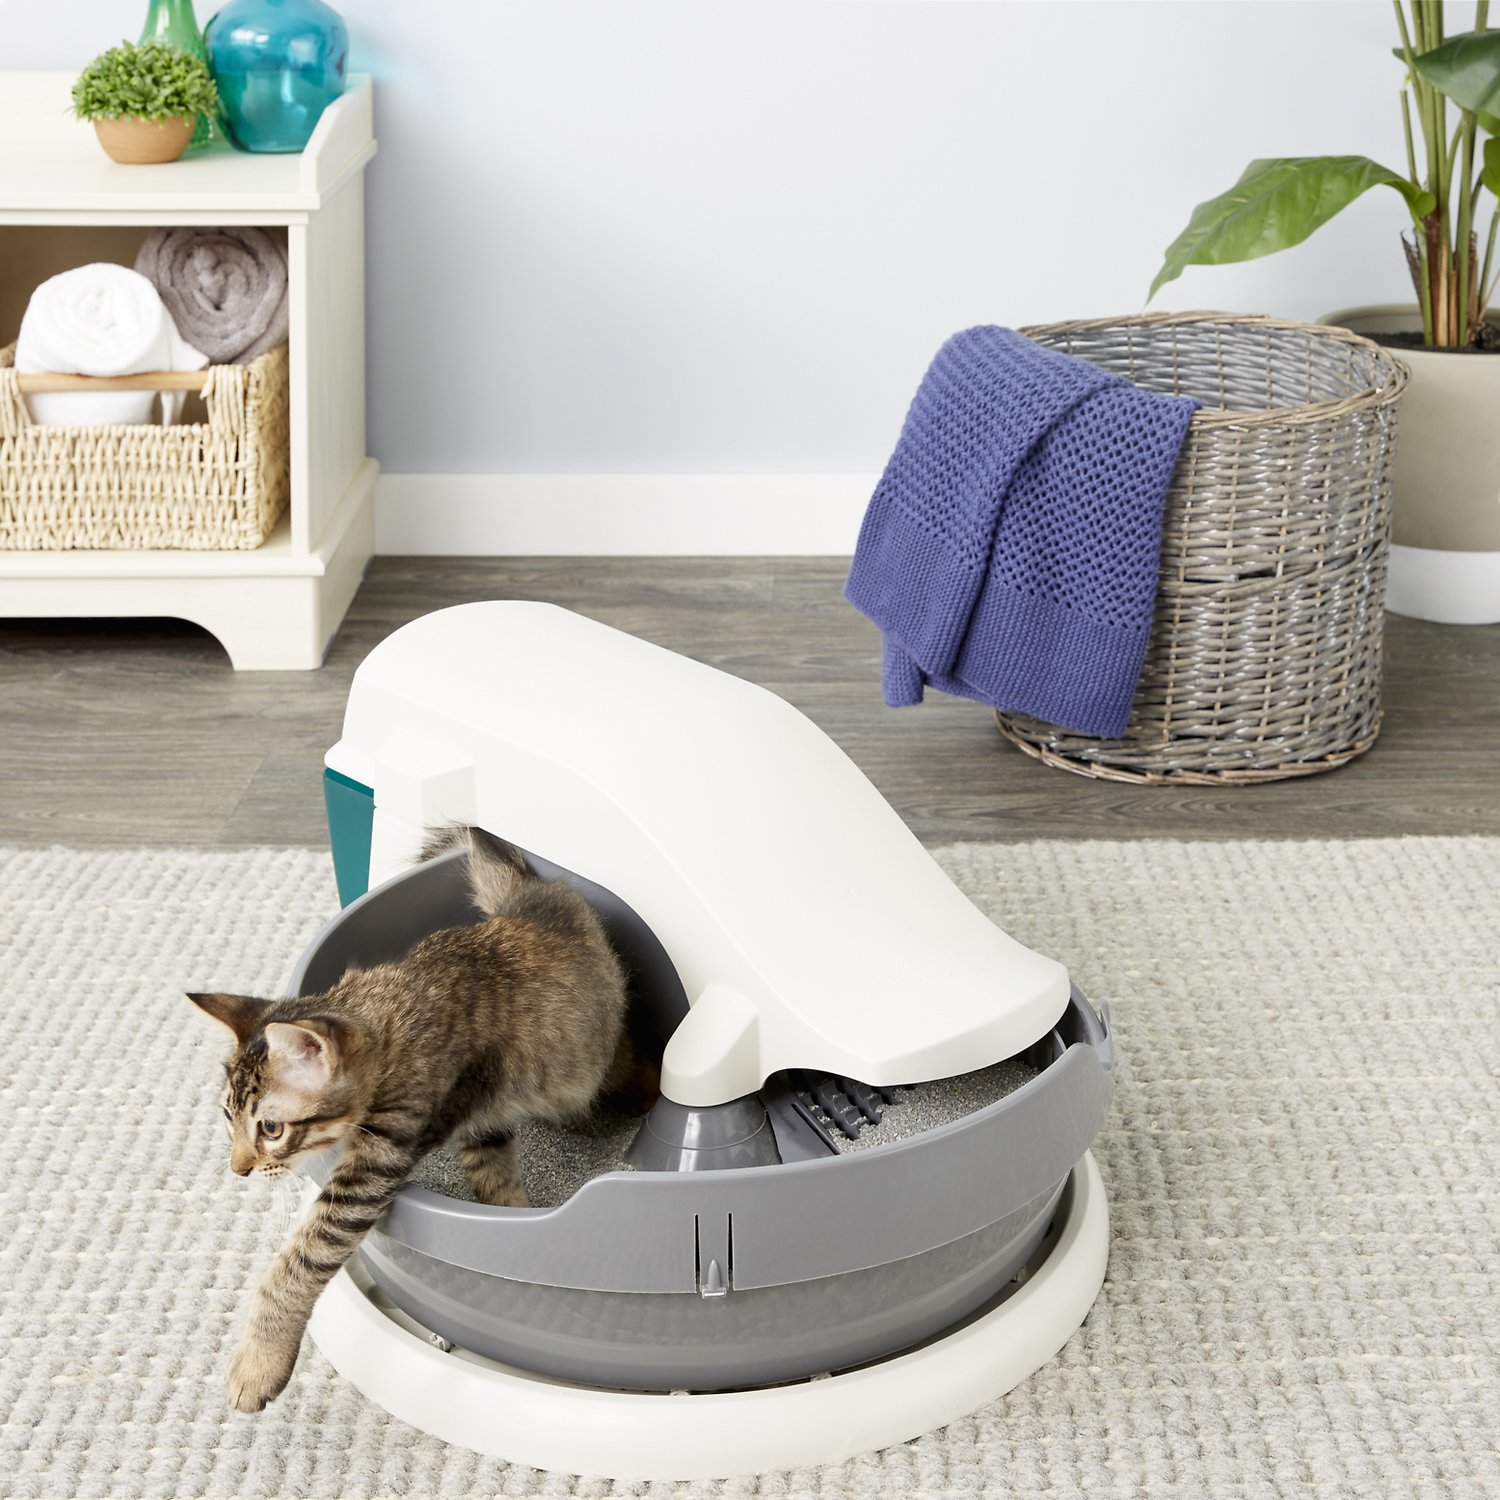 Best Automatic Cat Litter Box Reviews of SelfCleaning Litter Boxes 2021